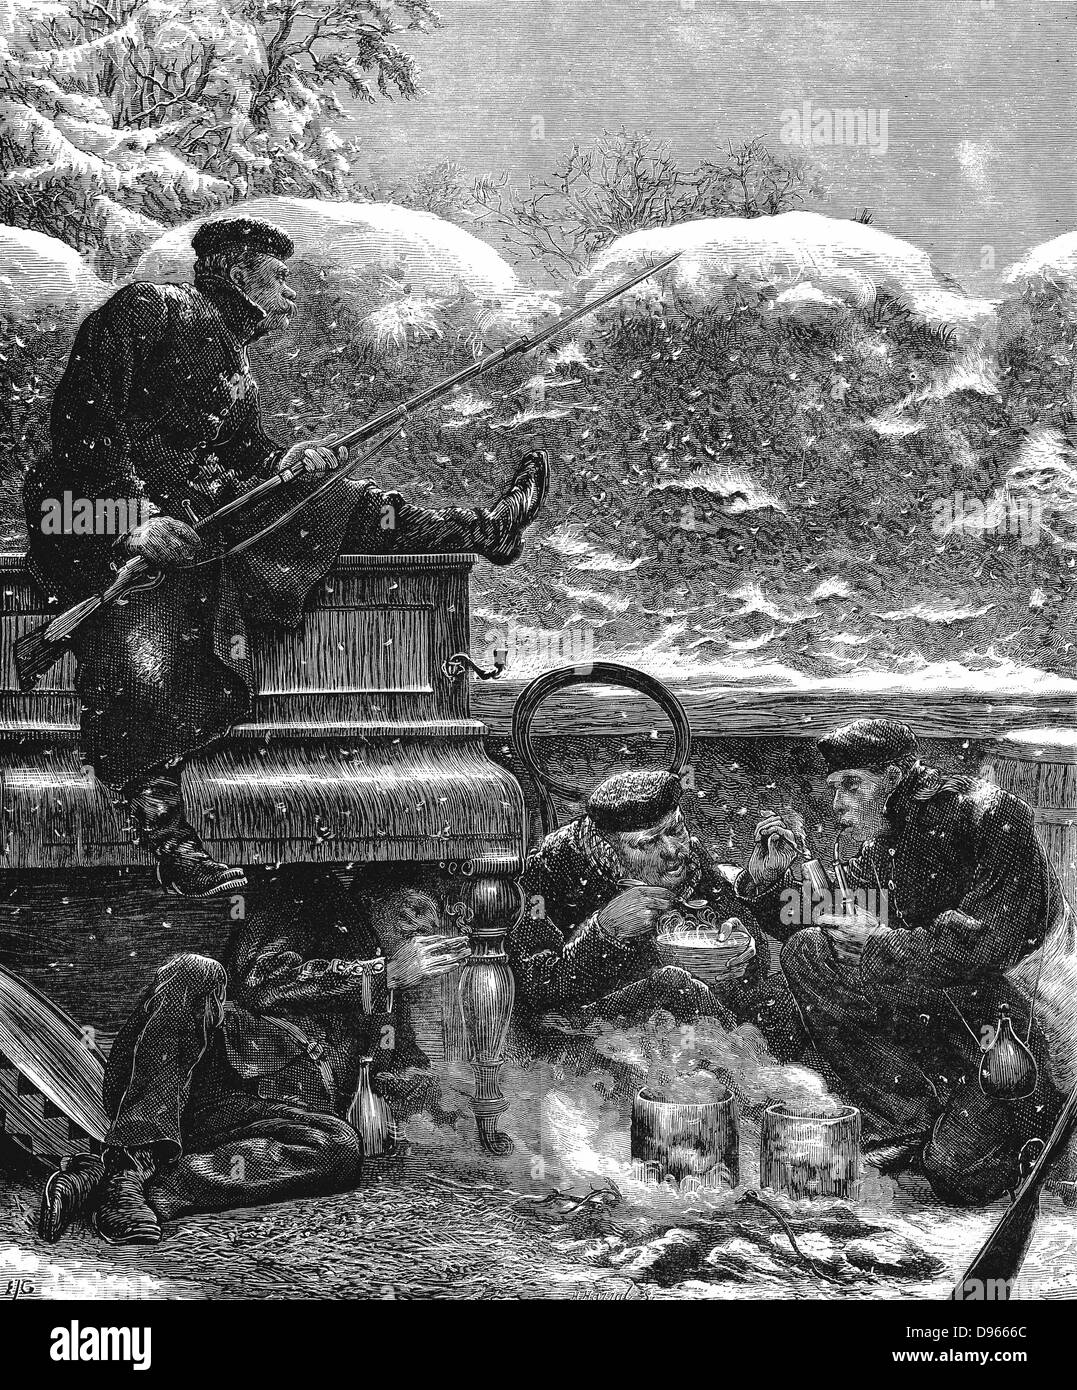 Franco-Prussian War 1870-1871: Prussian troops before Paris waiting for the sortie. One rifleman, bayonet fixed, sits on an upright piano keeping watch while his companions enjoy a meal and a smoke. Wood engraving, 17 December 1870. Stock Photo